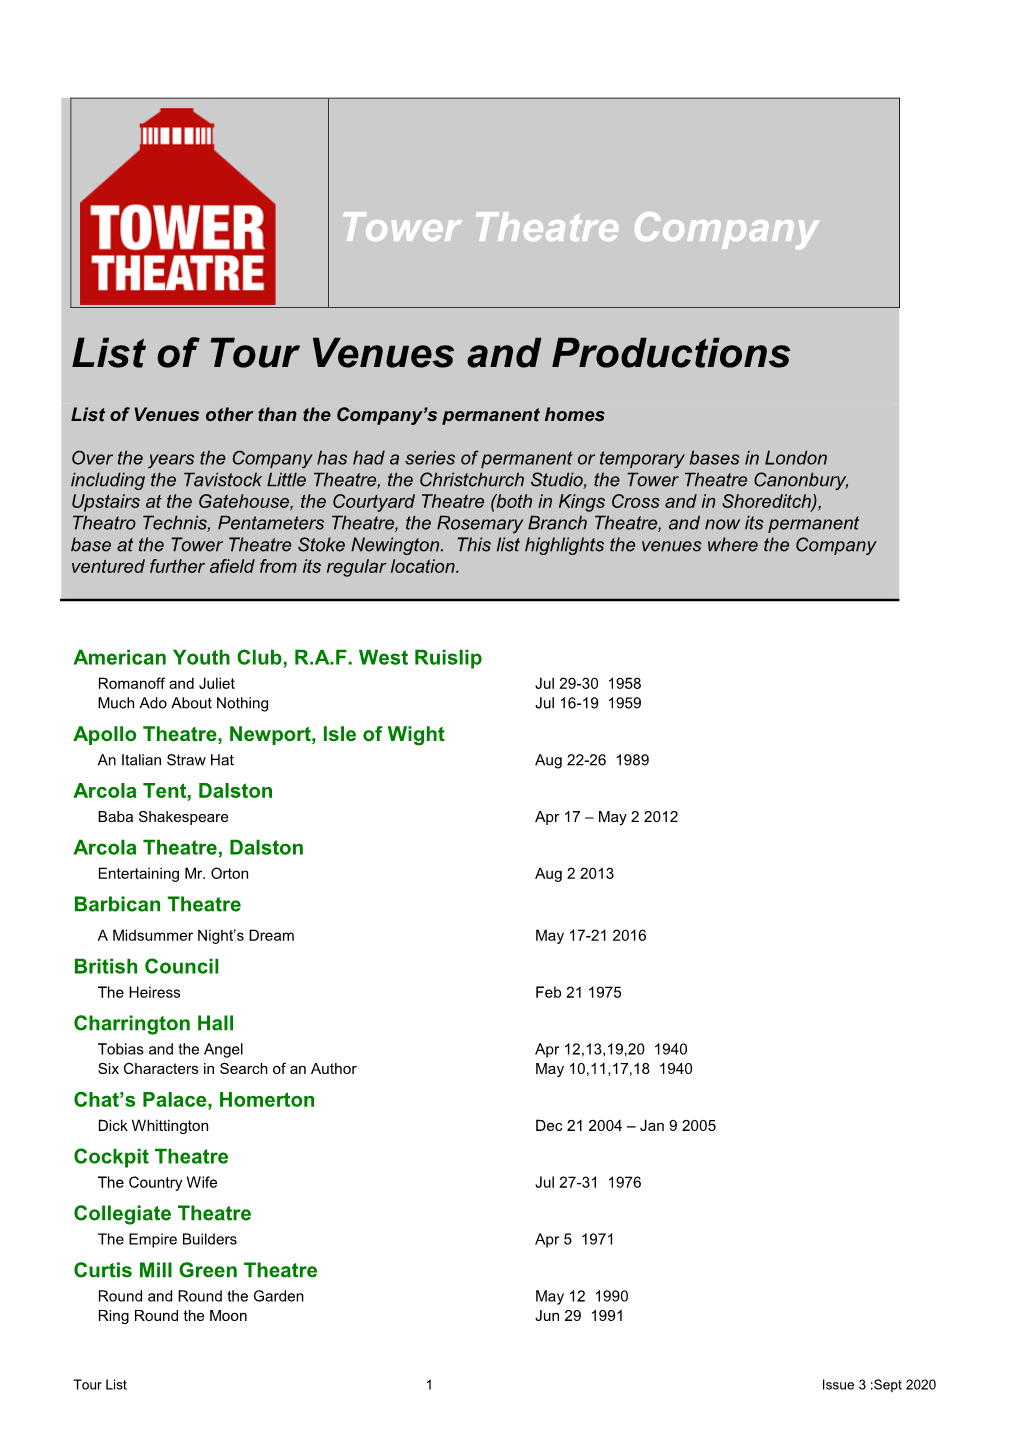 Tower Theatre Company List of Tour Venues and Productions